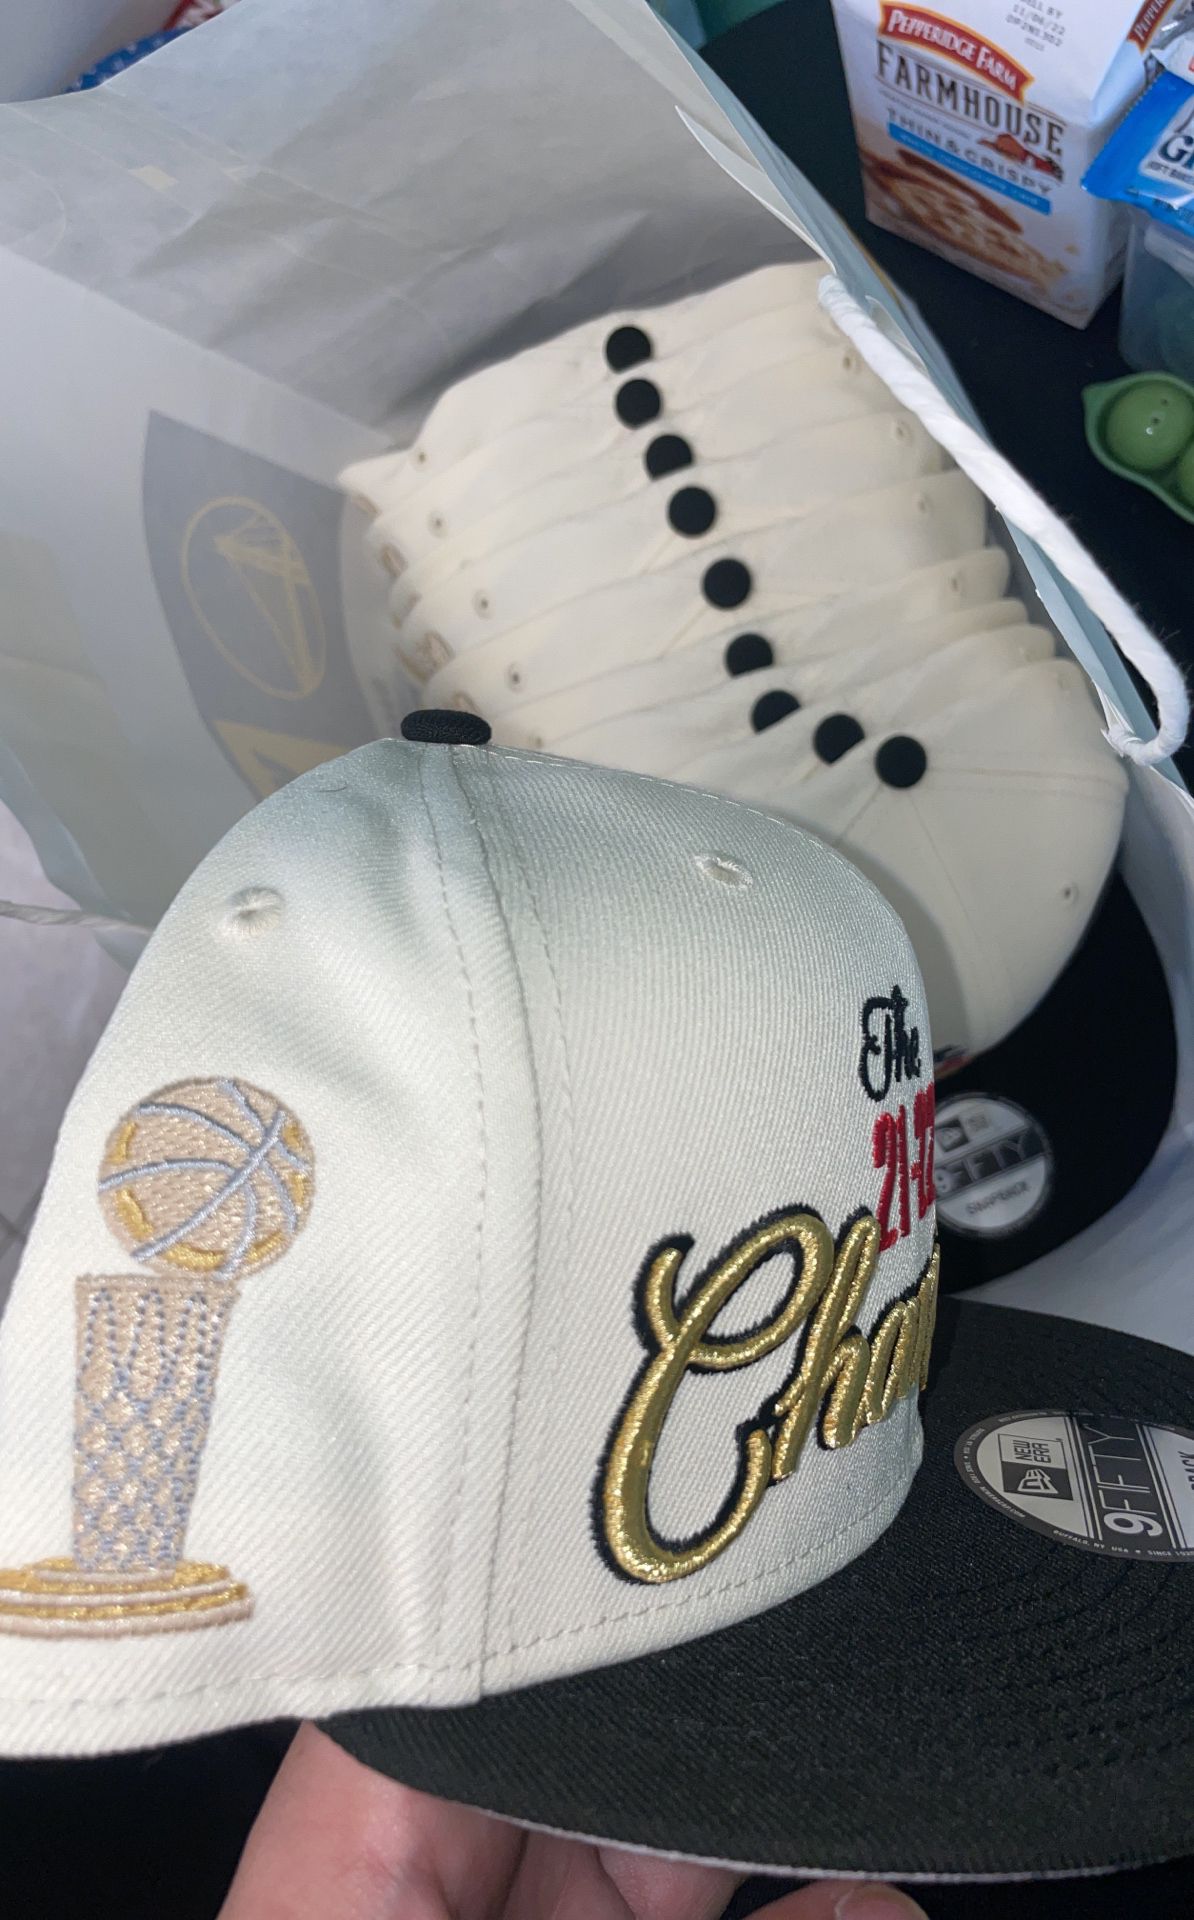 2022 Golden State Warriors Champions Hats for Sale in San Francisco, CA -  OfferUp